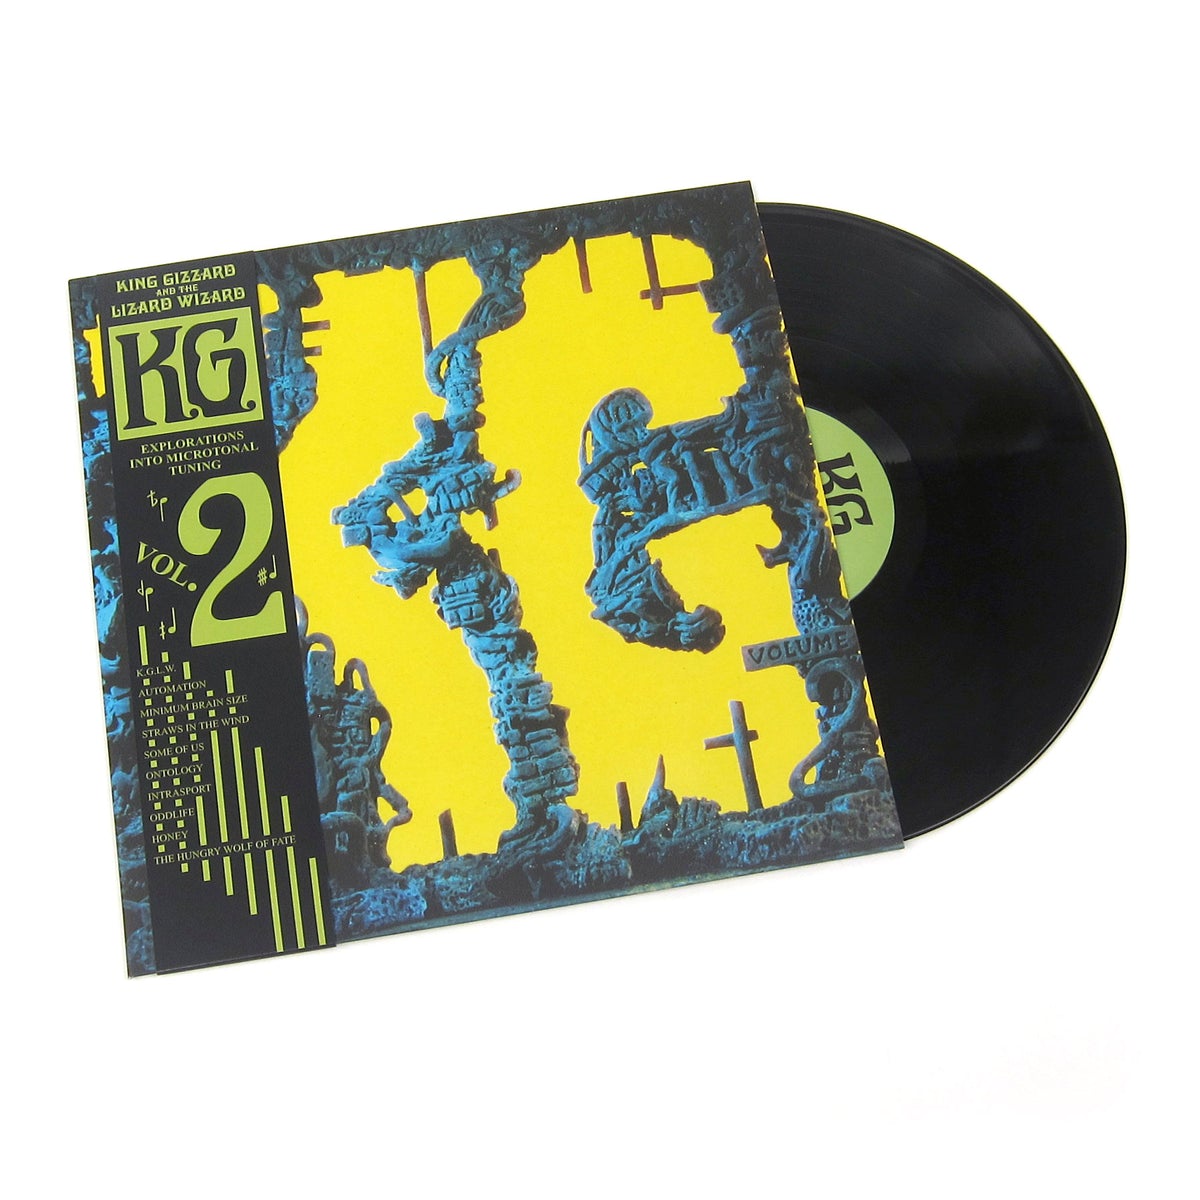 King Gizzard & The Lizard Wizard - K.G. (Explorations Into Microtonal Tuning Volume 2)